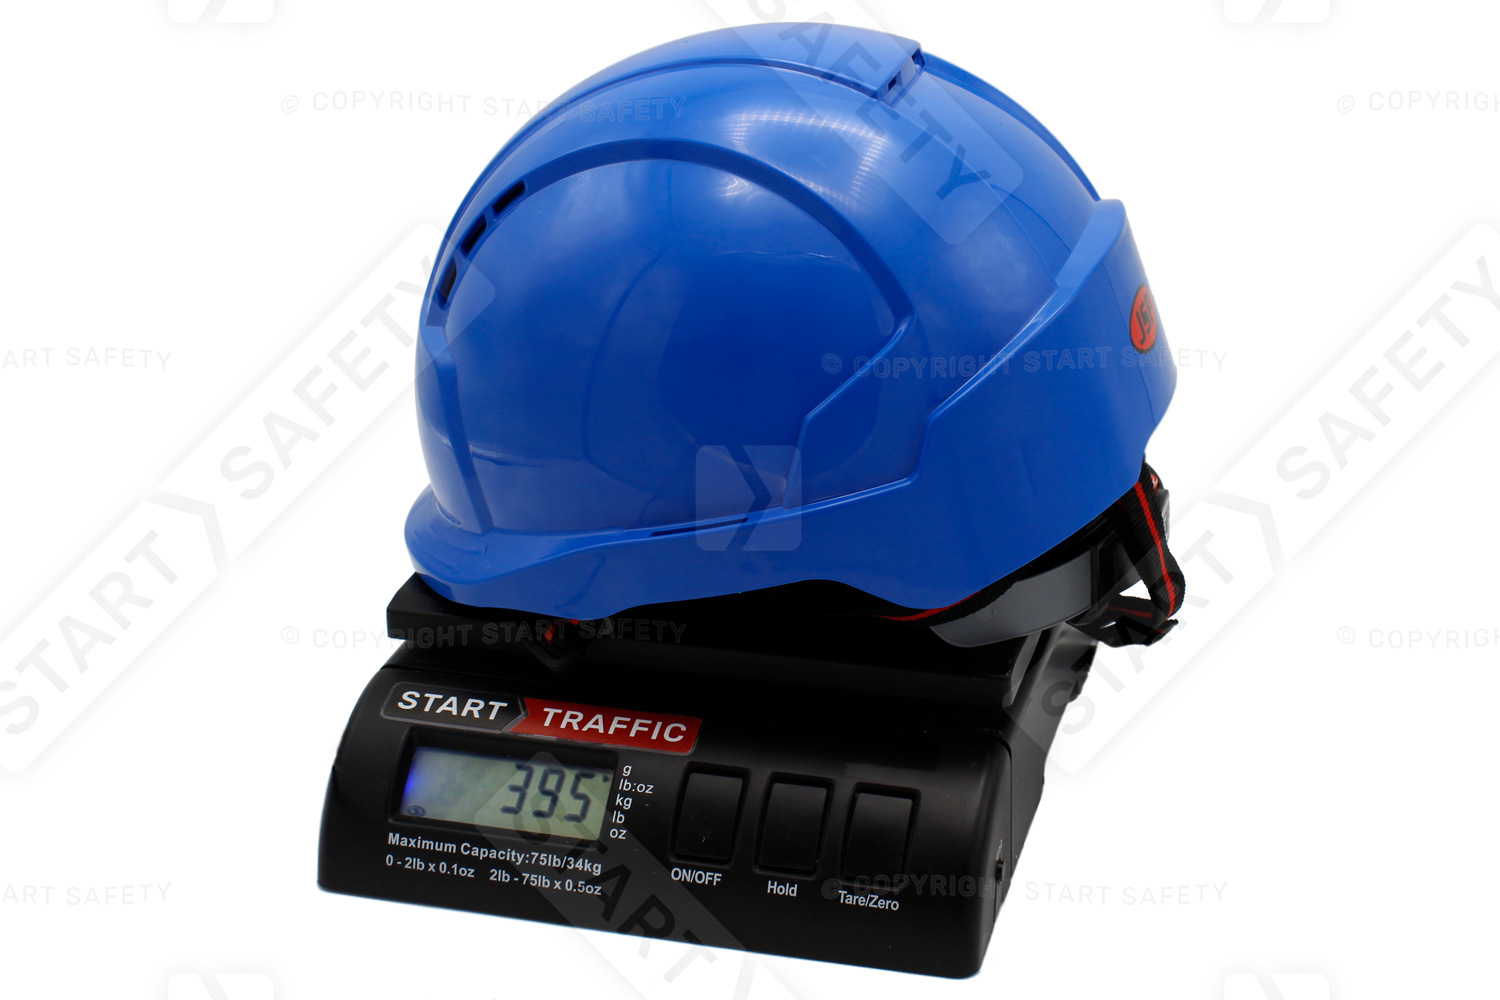 Evolite Skyworker With Impact Resistant Liner, Harness And 4-point Chin Straps On A Scale Weighing 395g